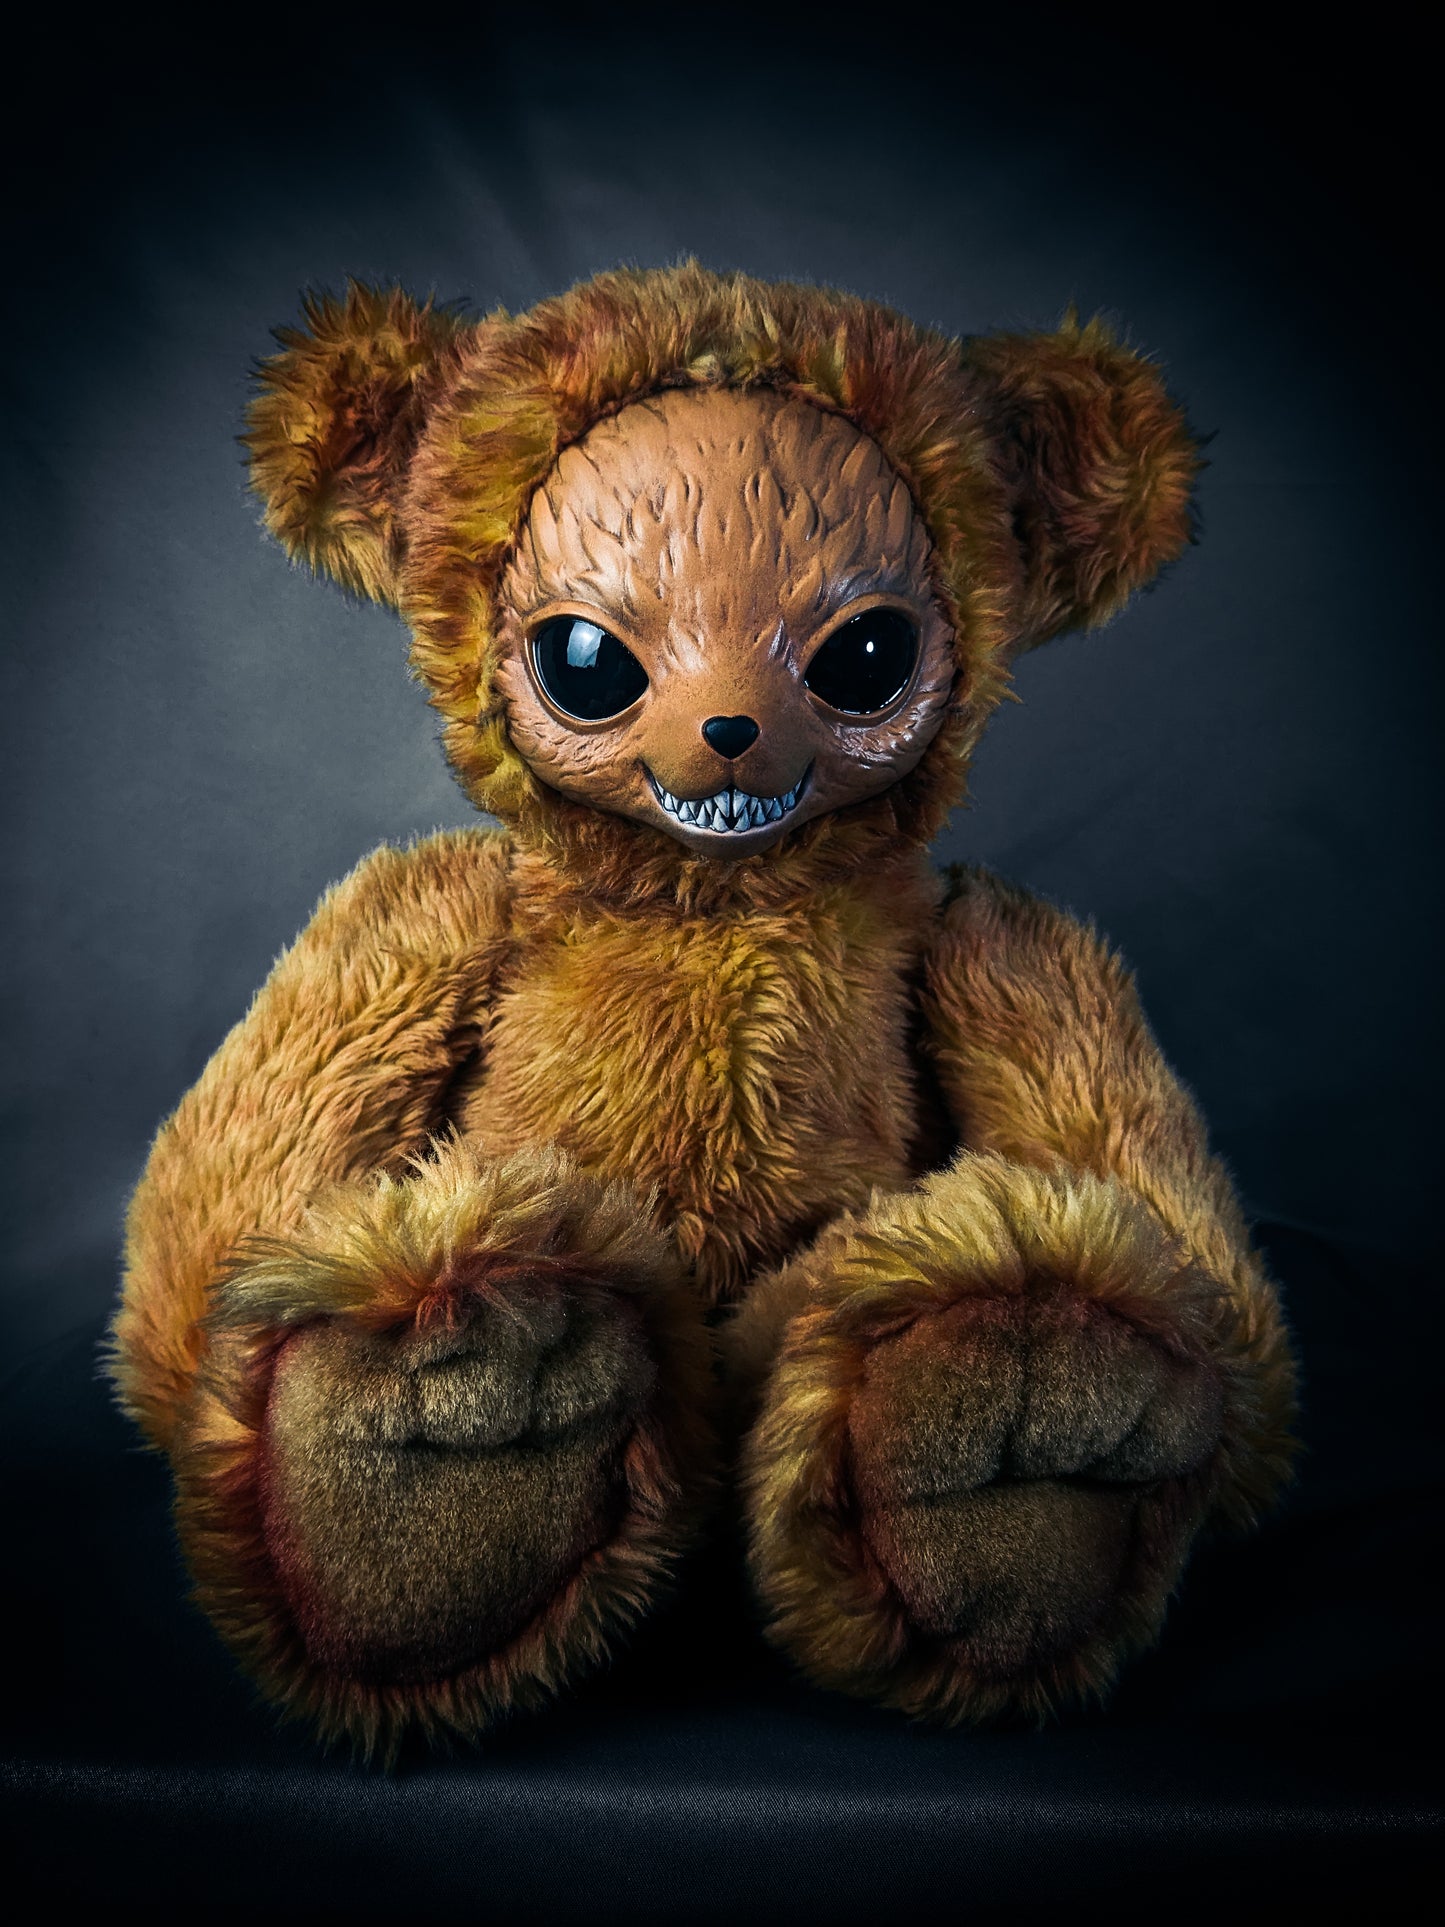 Teething n' Tearing: HOWL - CRYPTCRITS Handcrafted Creepy Cute Monster Art Doll Plush Toy for Cryptozoologists